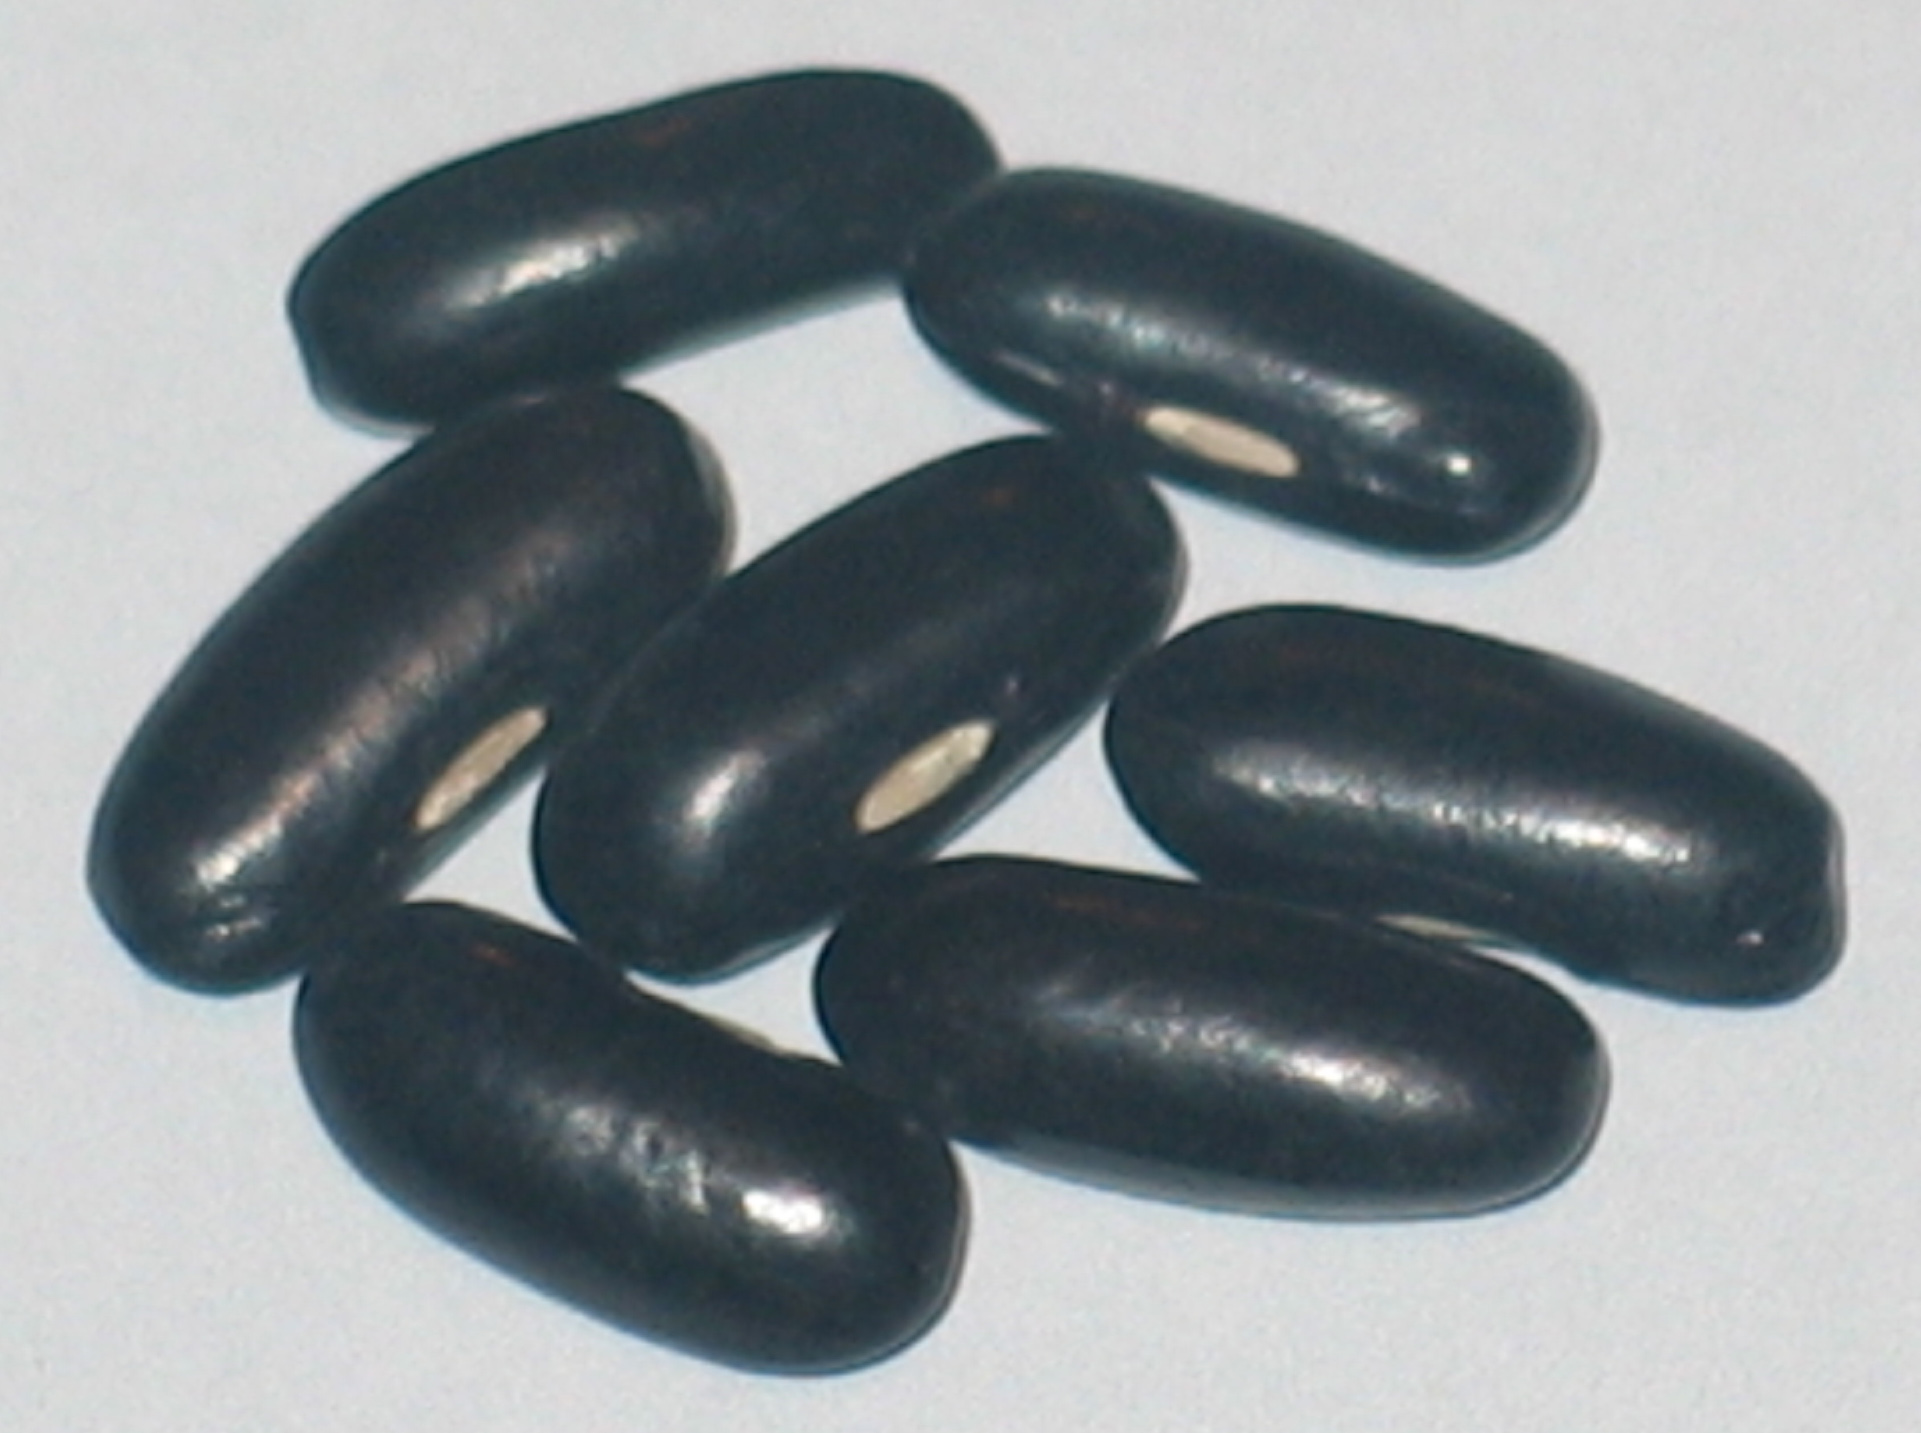 image of Roc D' Or beans